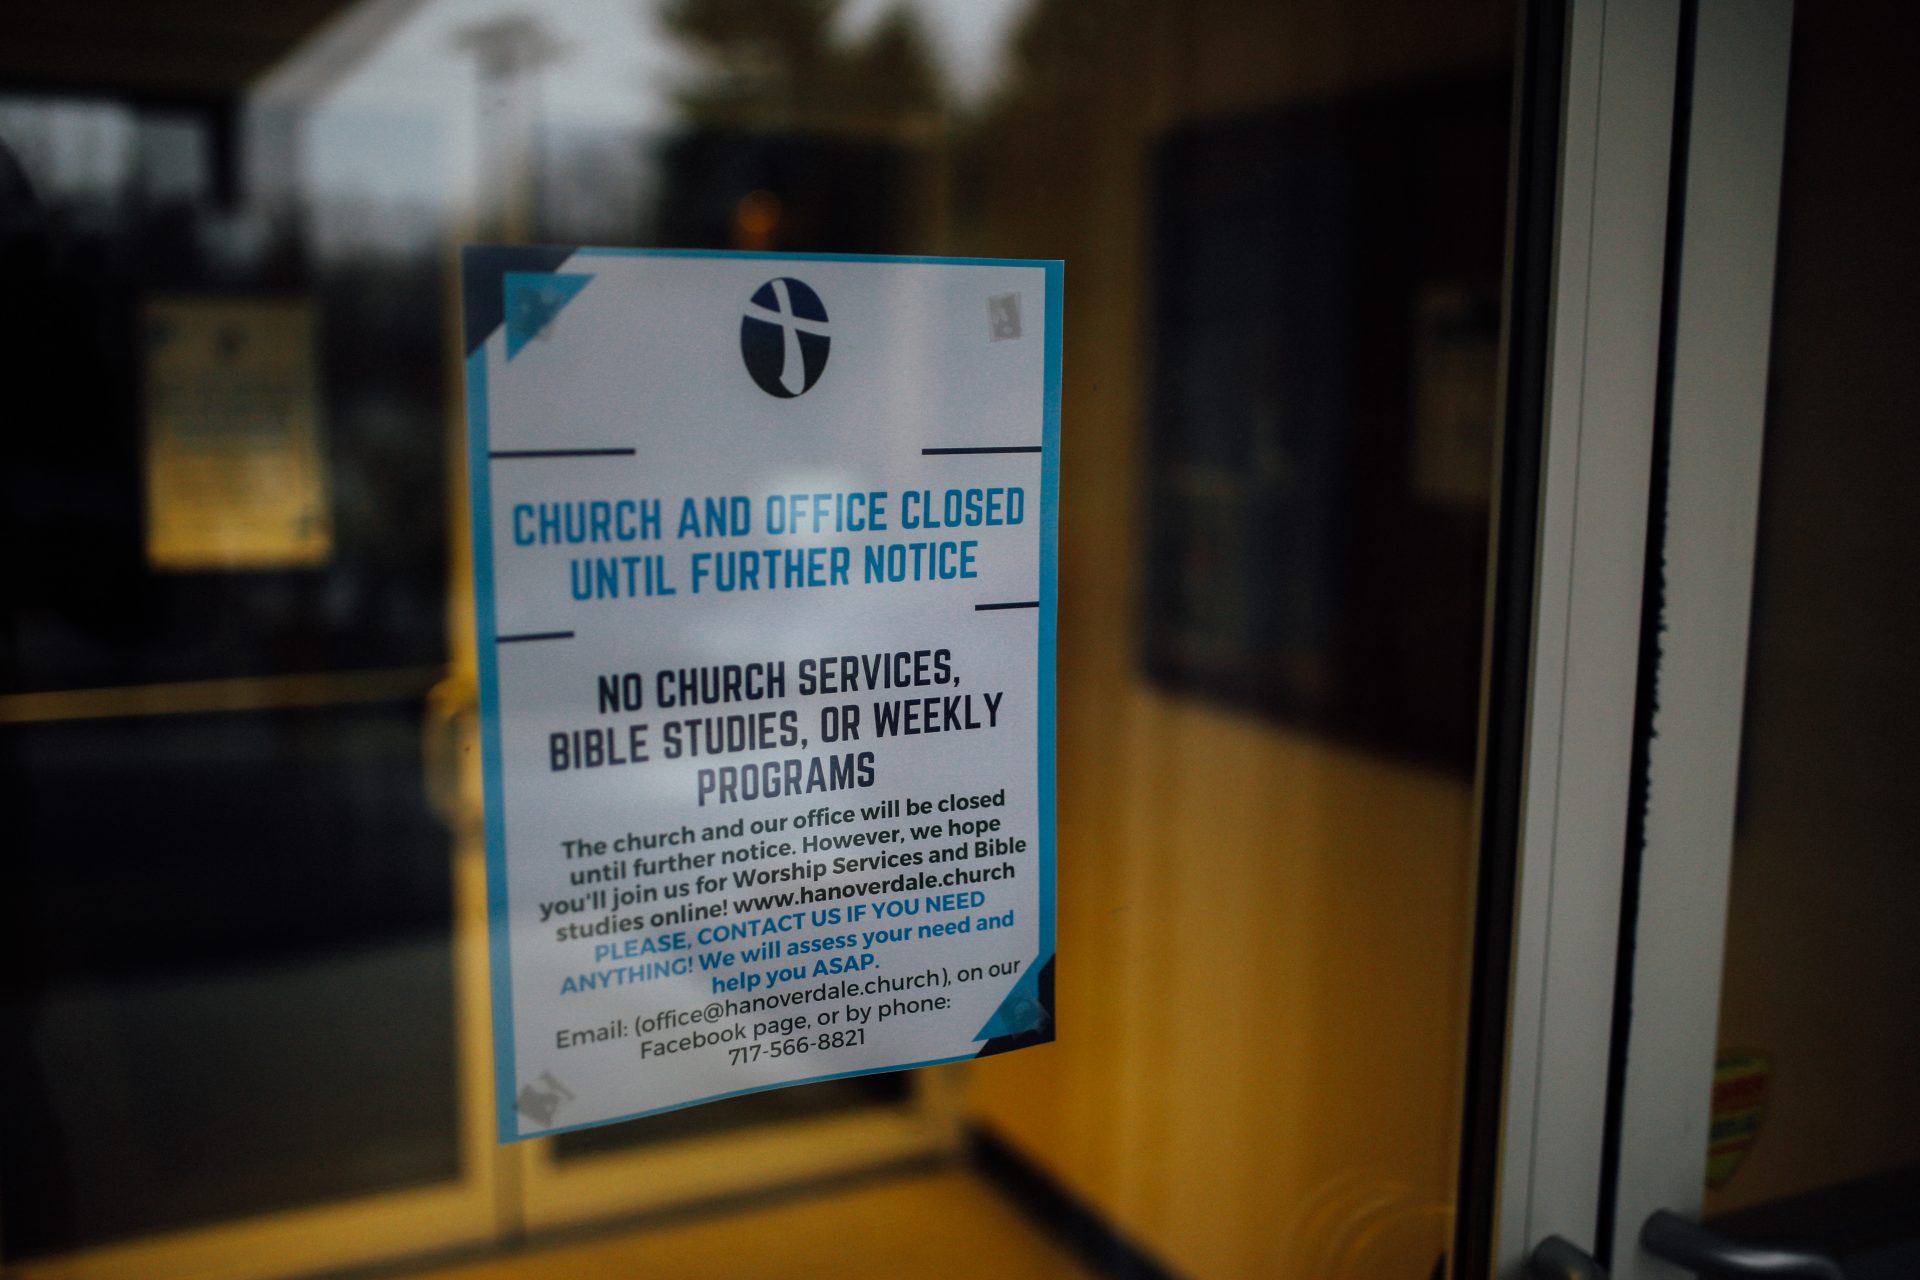 A sign on the Hanoverdale Church of The Brethren in Hummelstown, Pa., shows the church and office are closed until further notice during the coronavirus pandemic and statewide stay-at-home order.